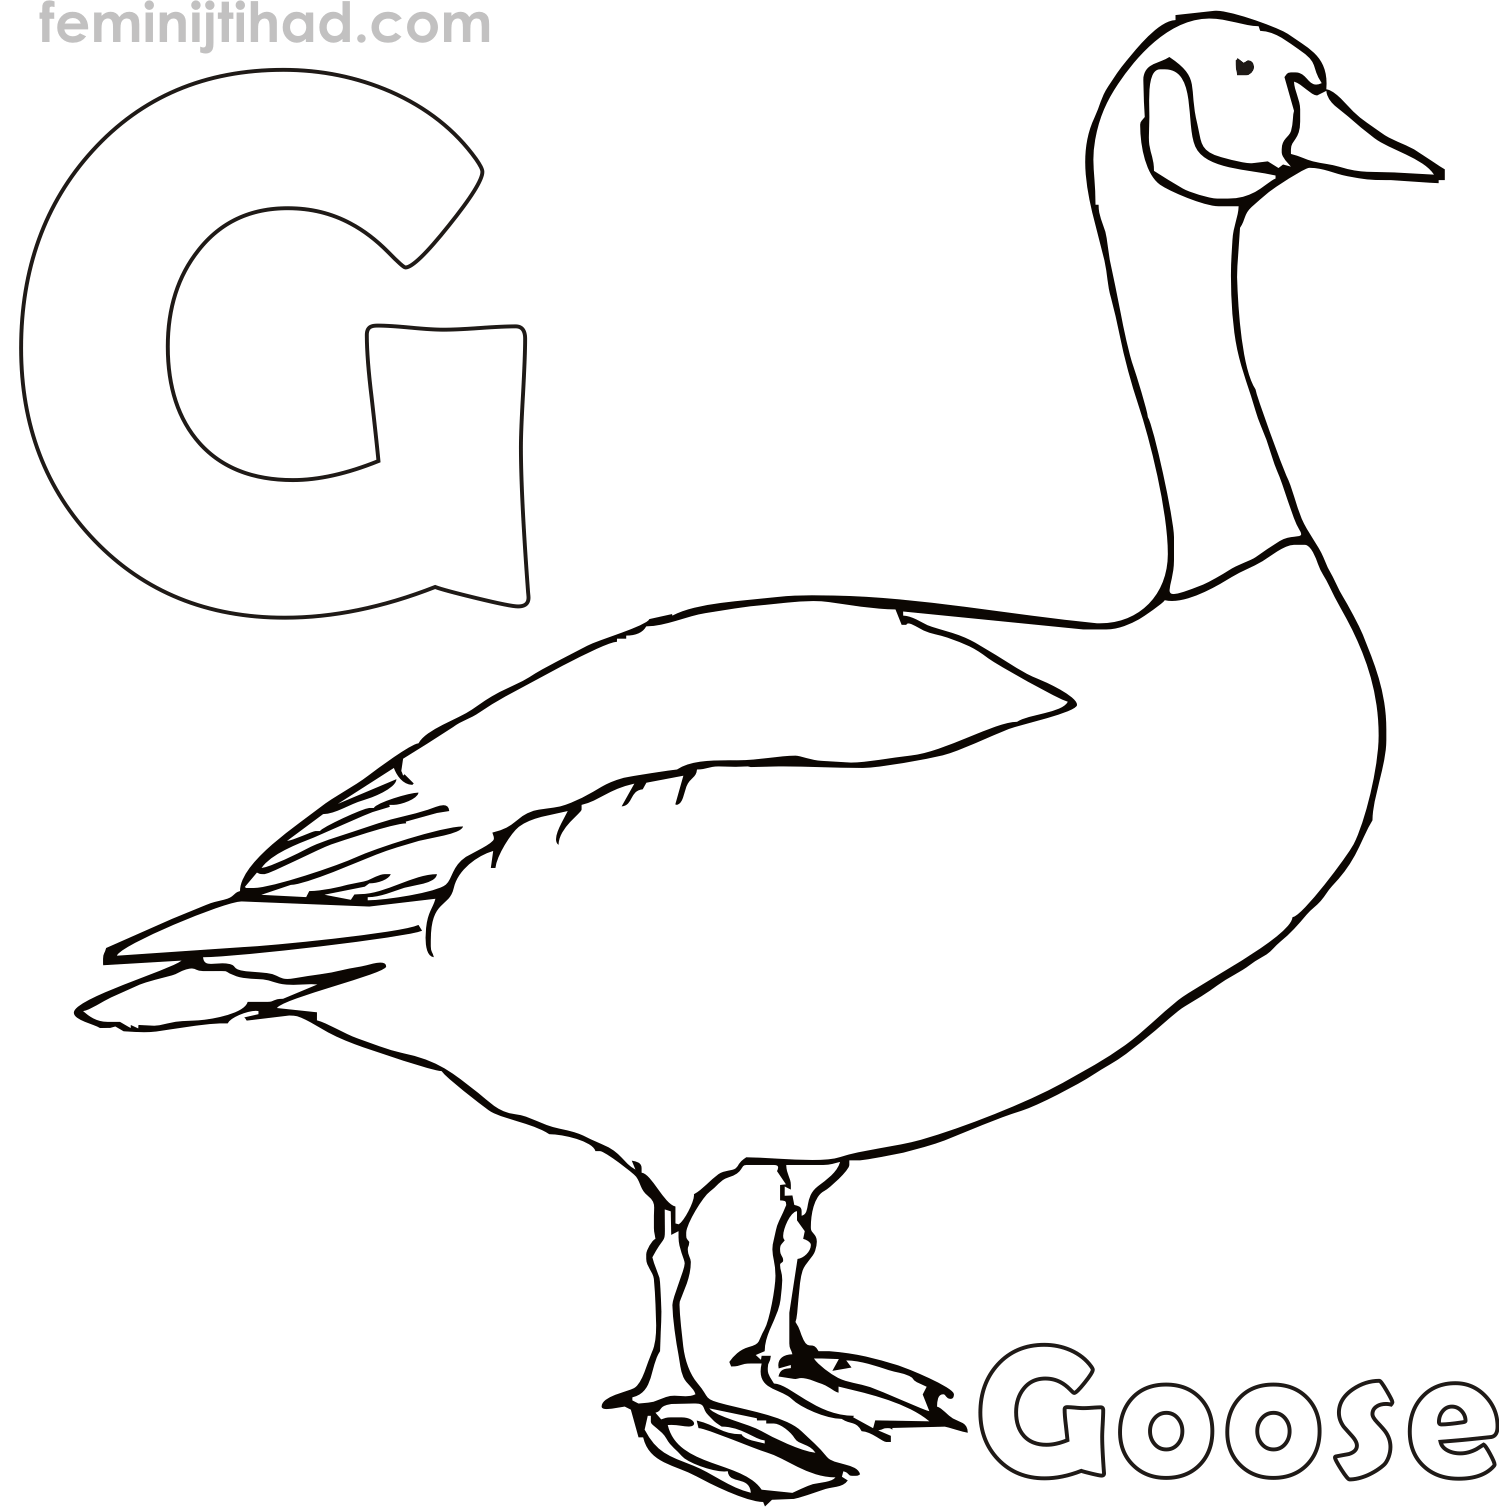 coloring page of goose